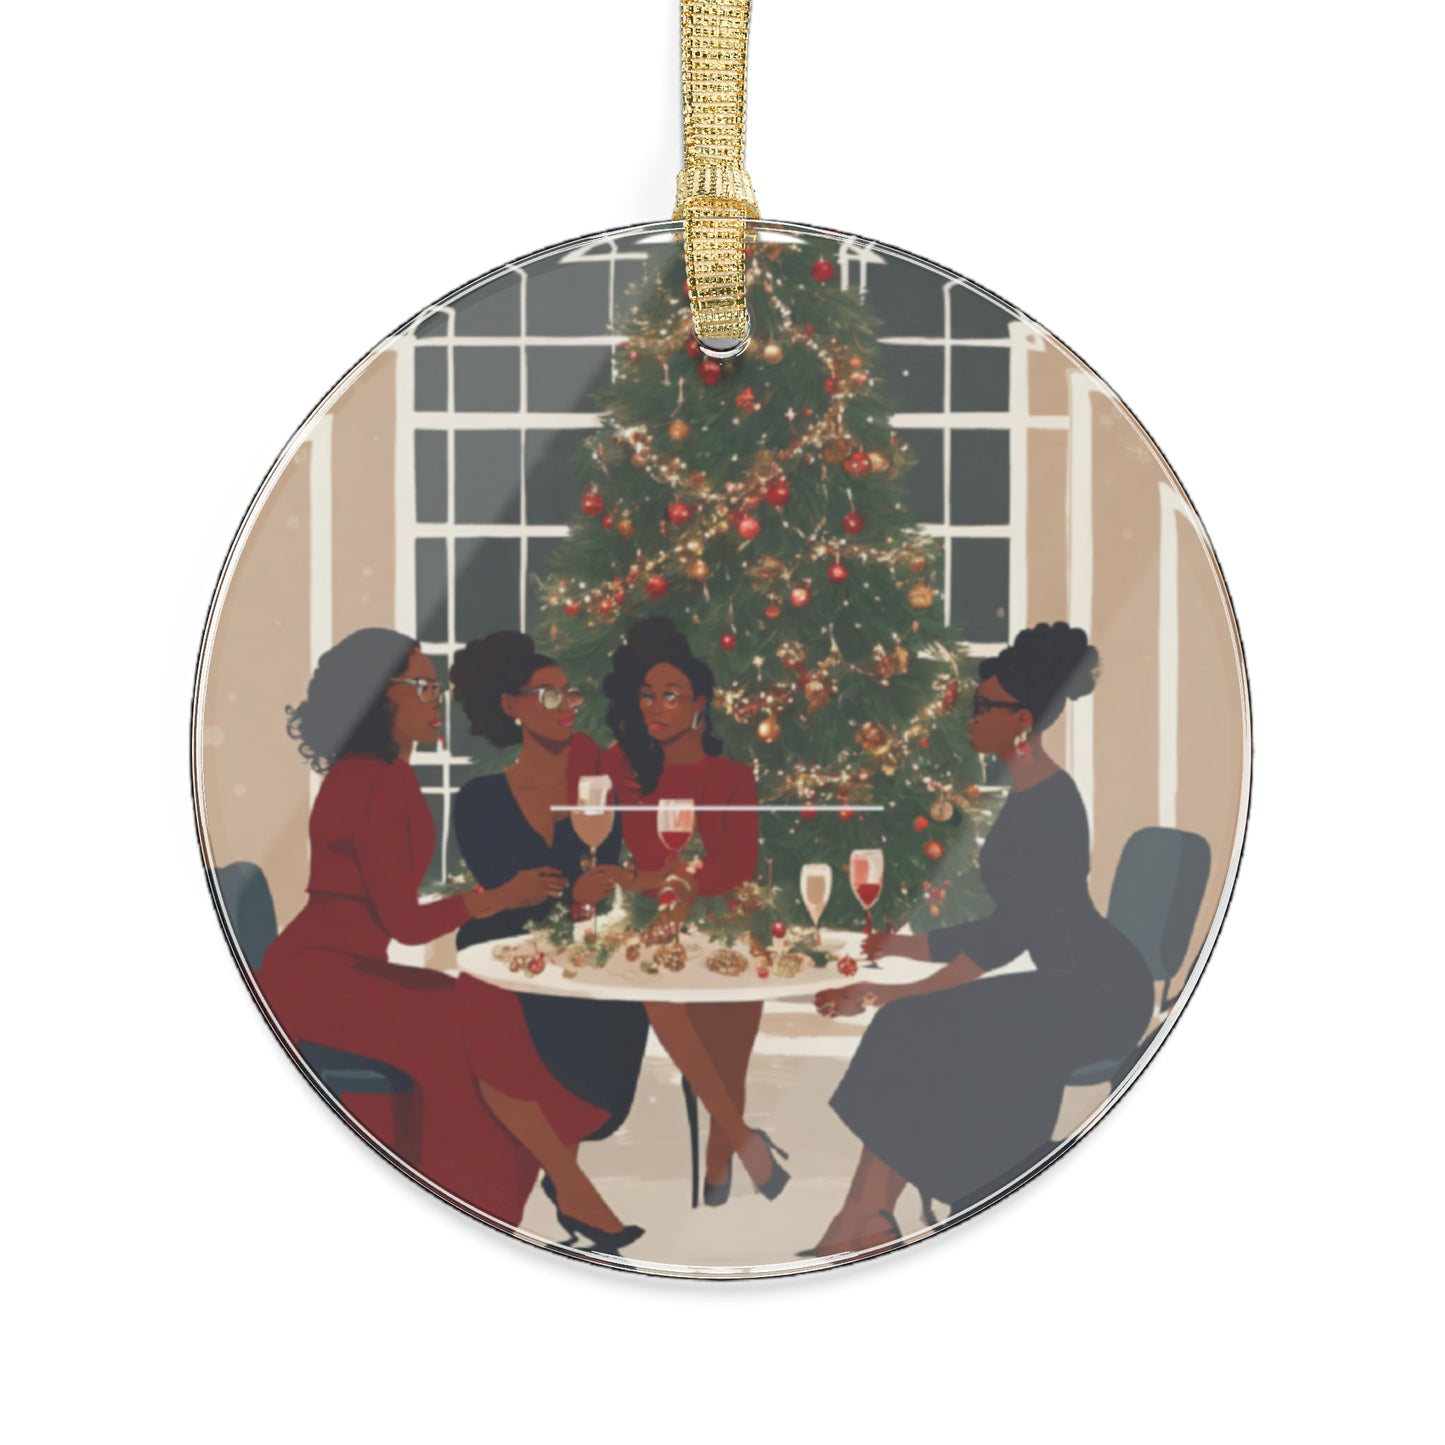 Sisters Gathering for the Holidays Acrylic Ornaments